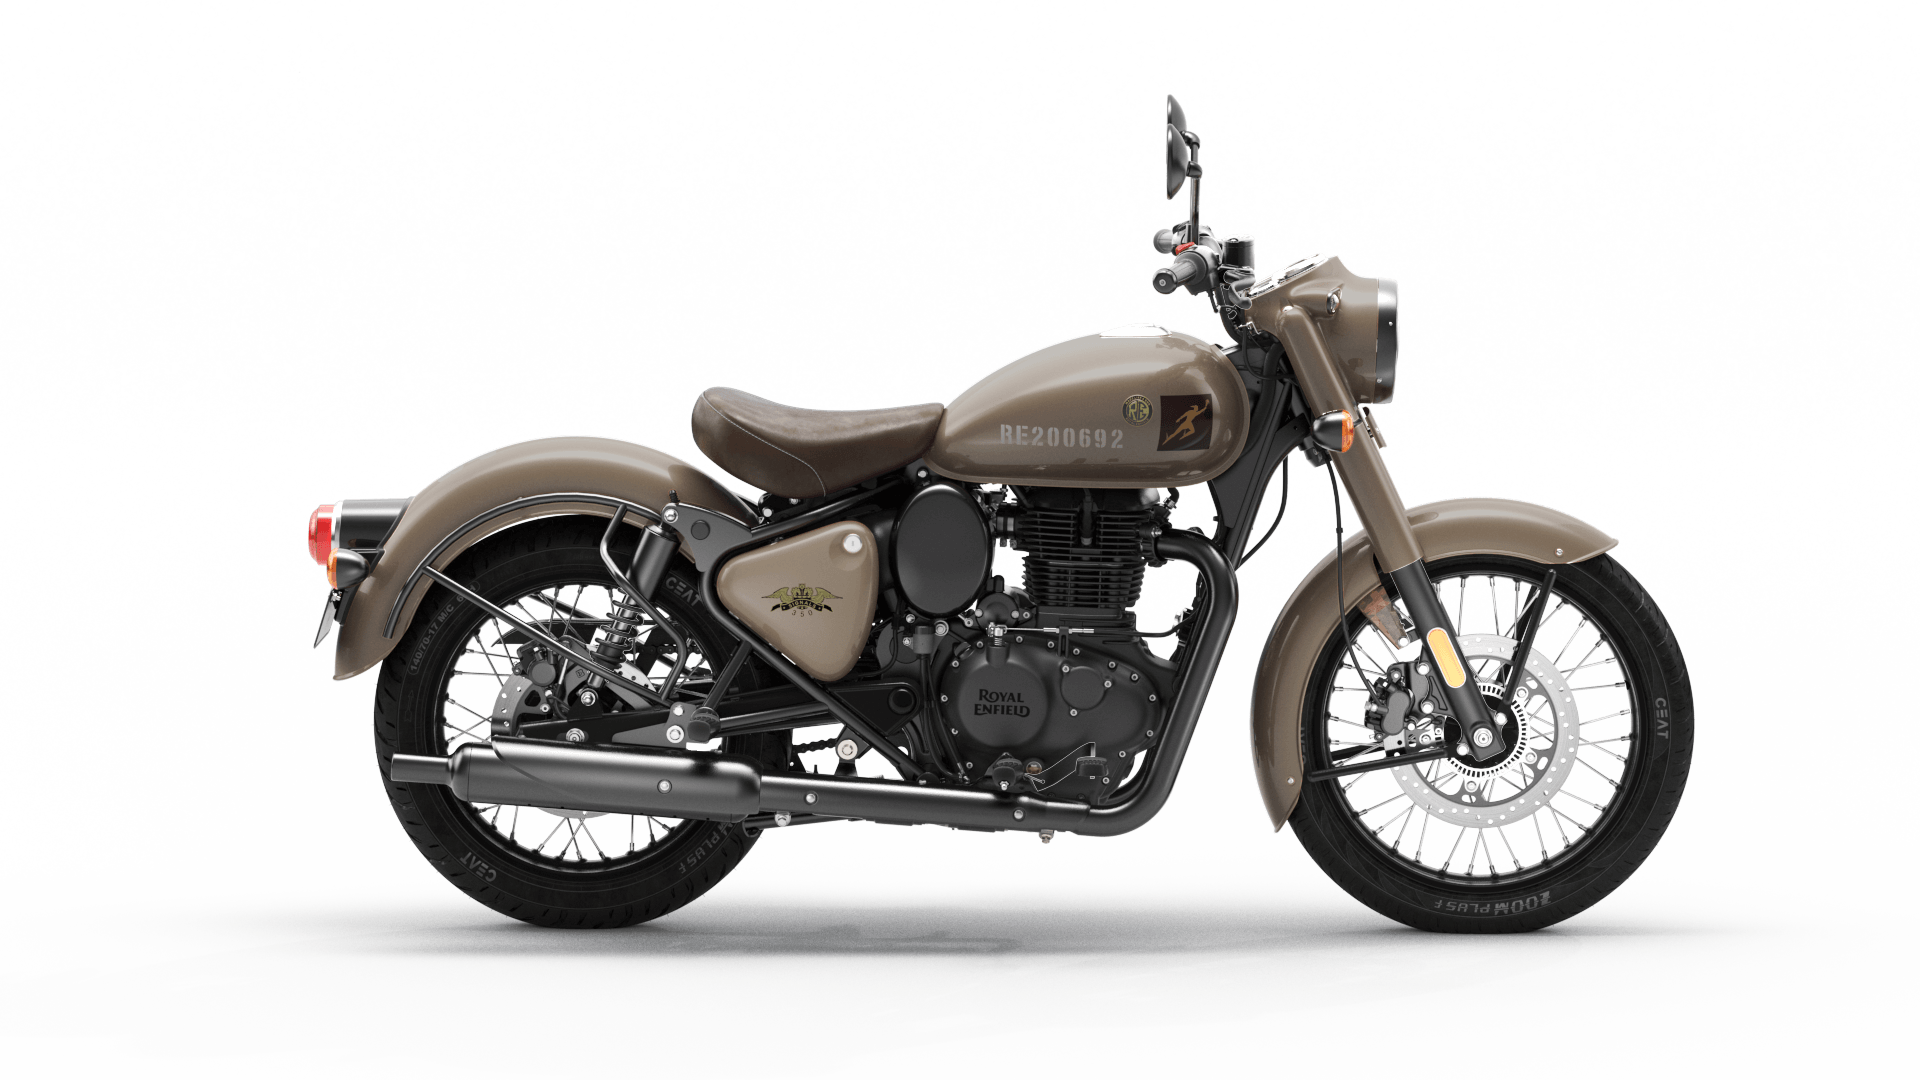  New Royal Enfield Classic 350 is reborn retro